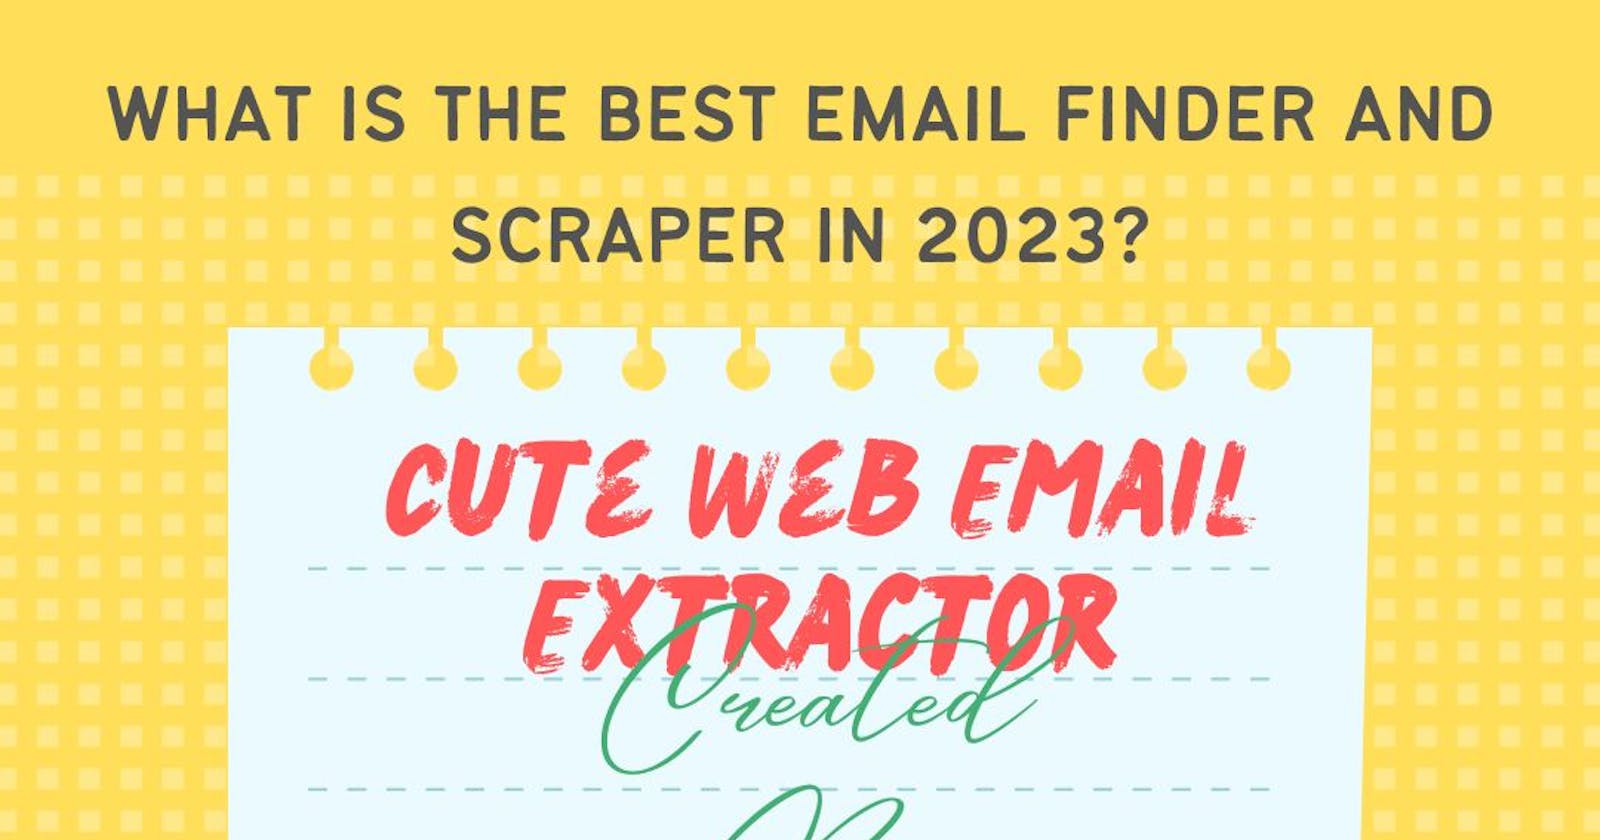 What Is The Email Finder And Extractor In 2023?